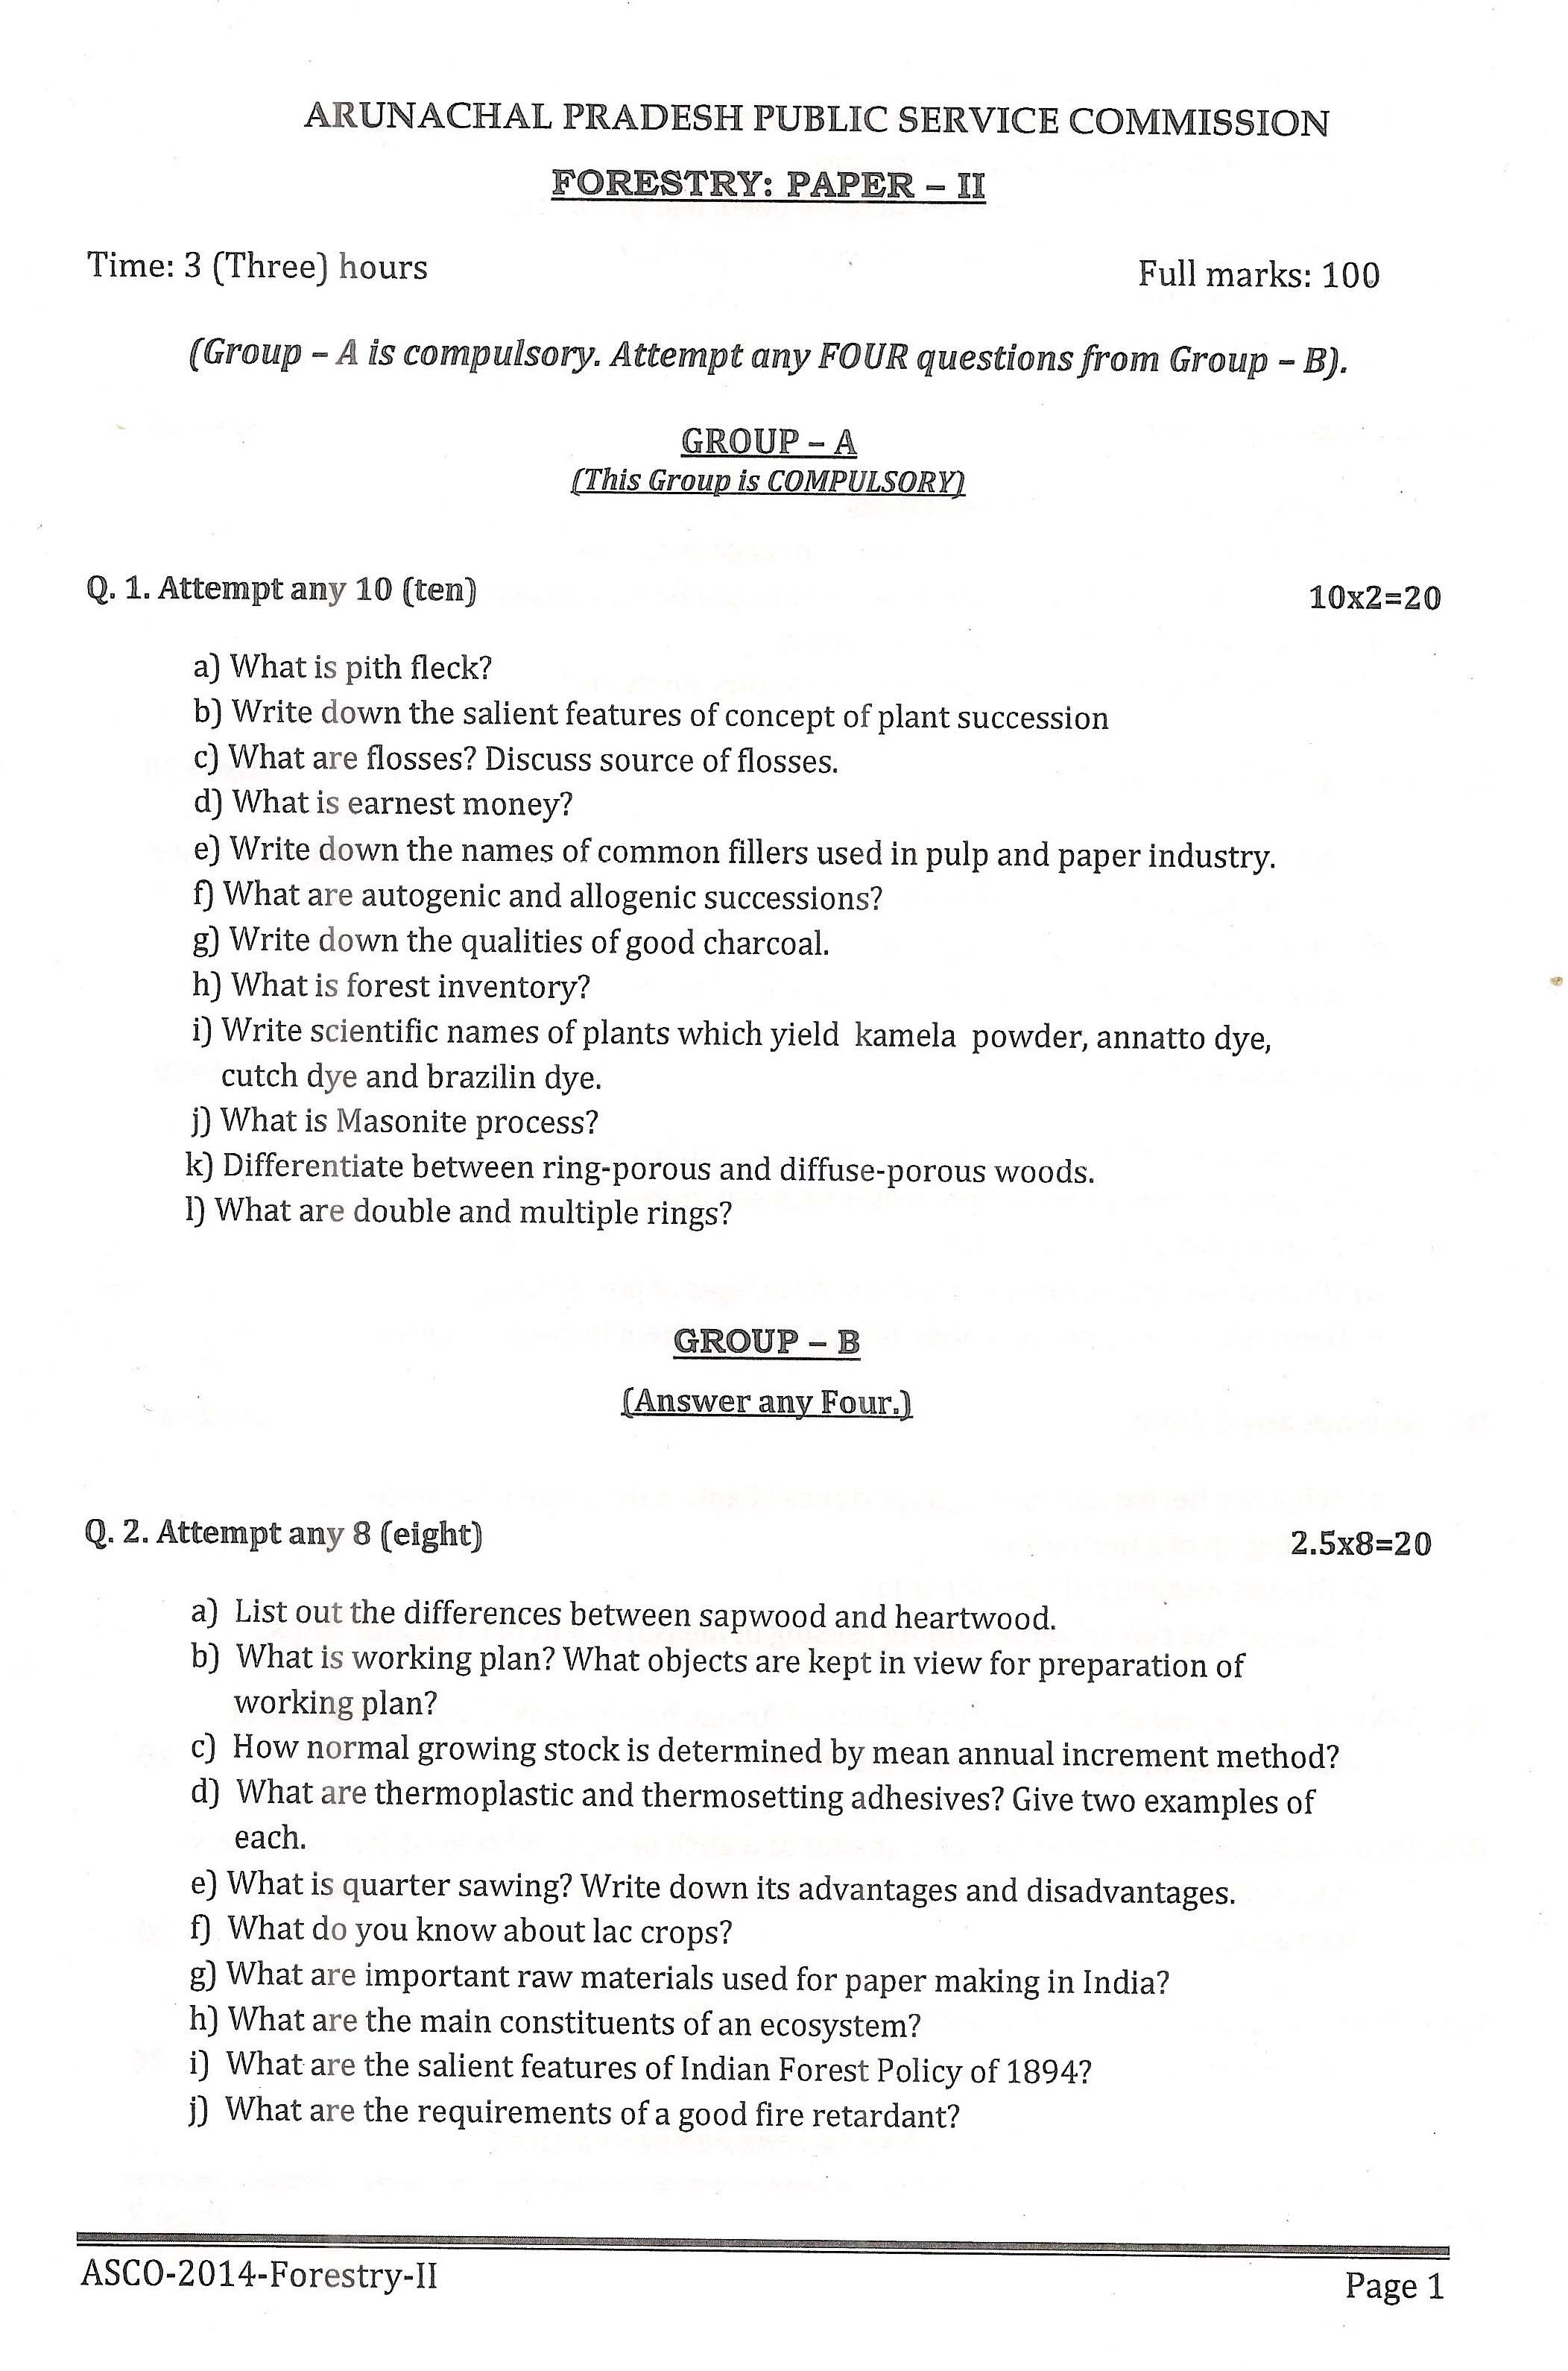 APPSC ASCO Forestry Paper II Exam Question Paper 2014 1